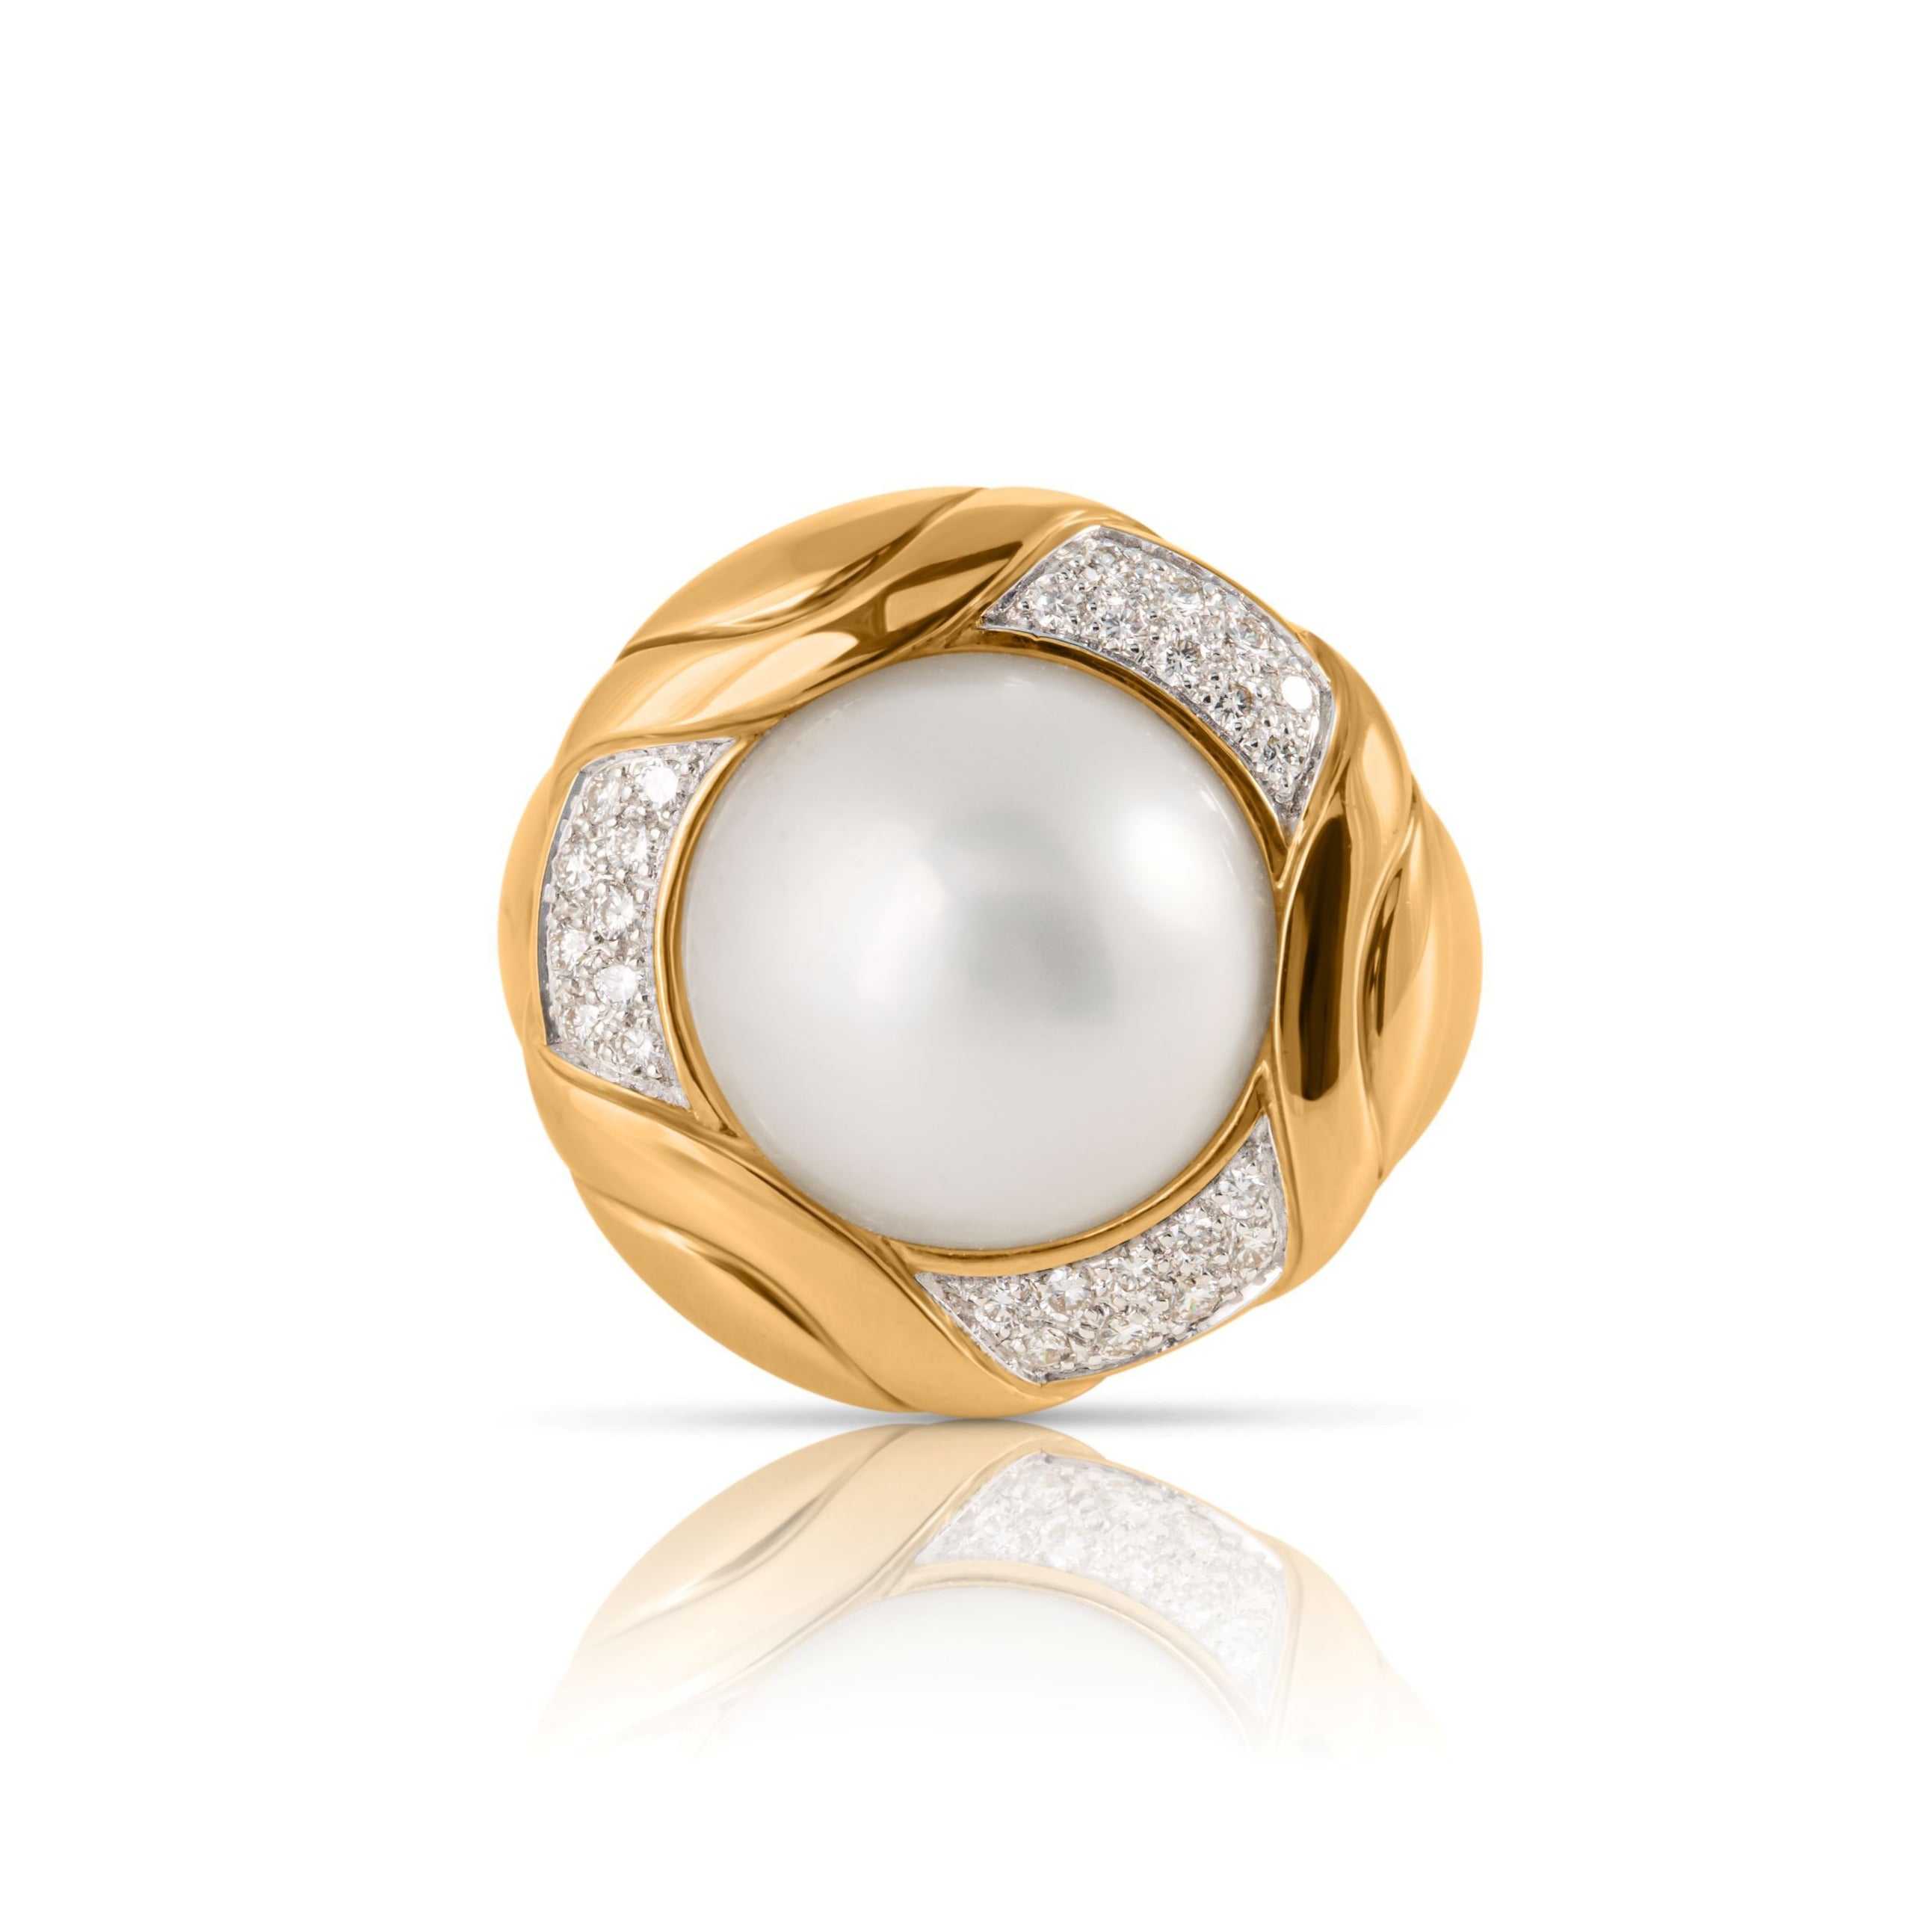 18ct gold pearl ring with diamond accents.